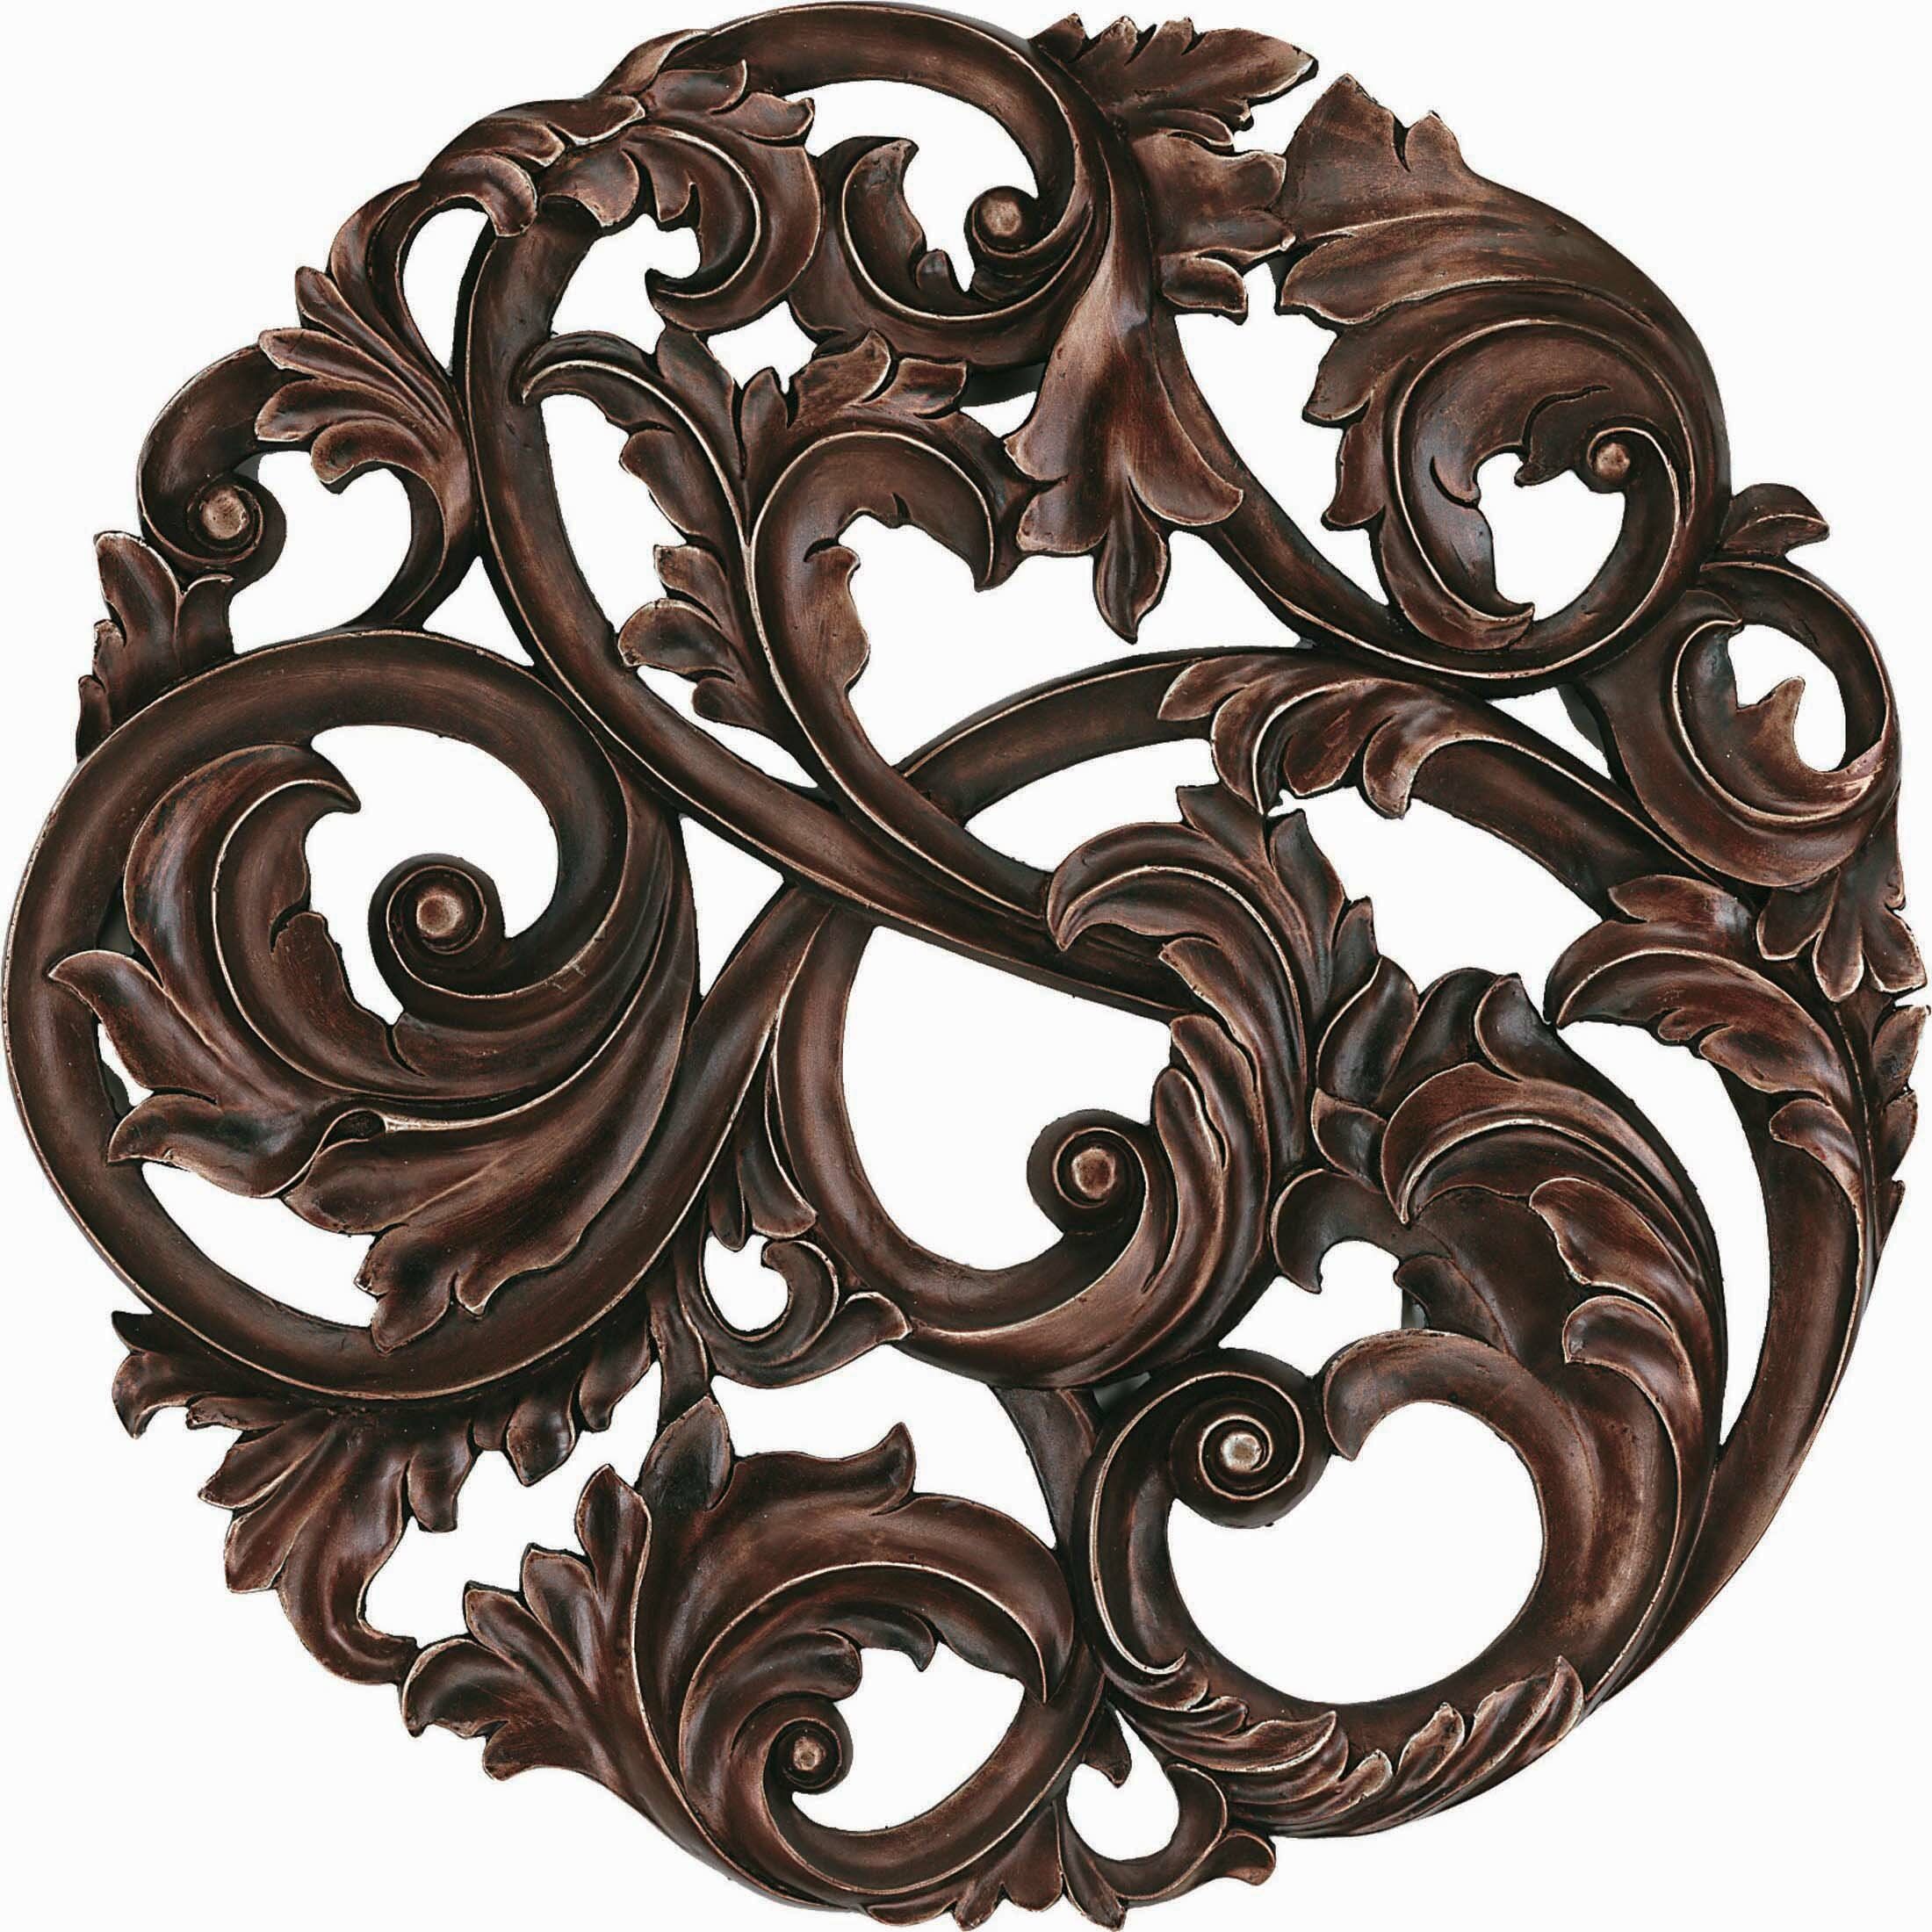 Paragon Aged Leaf Swirl Wall Décor & Reviews | Wayfair Throughout Swirl Wall Art (View 14 of 15)